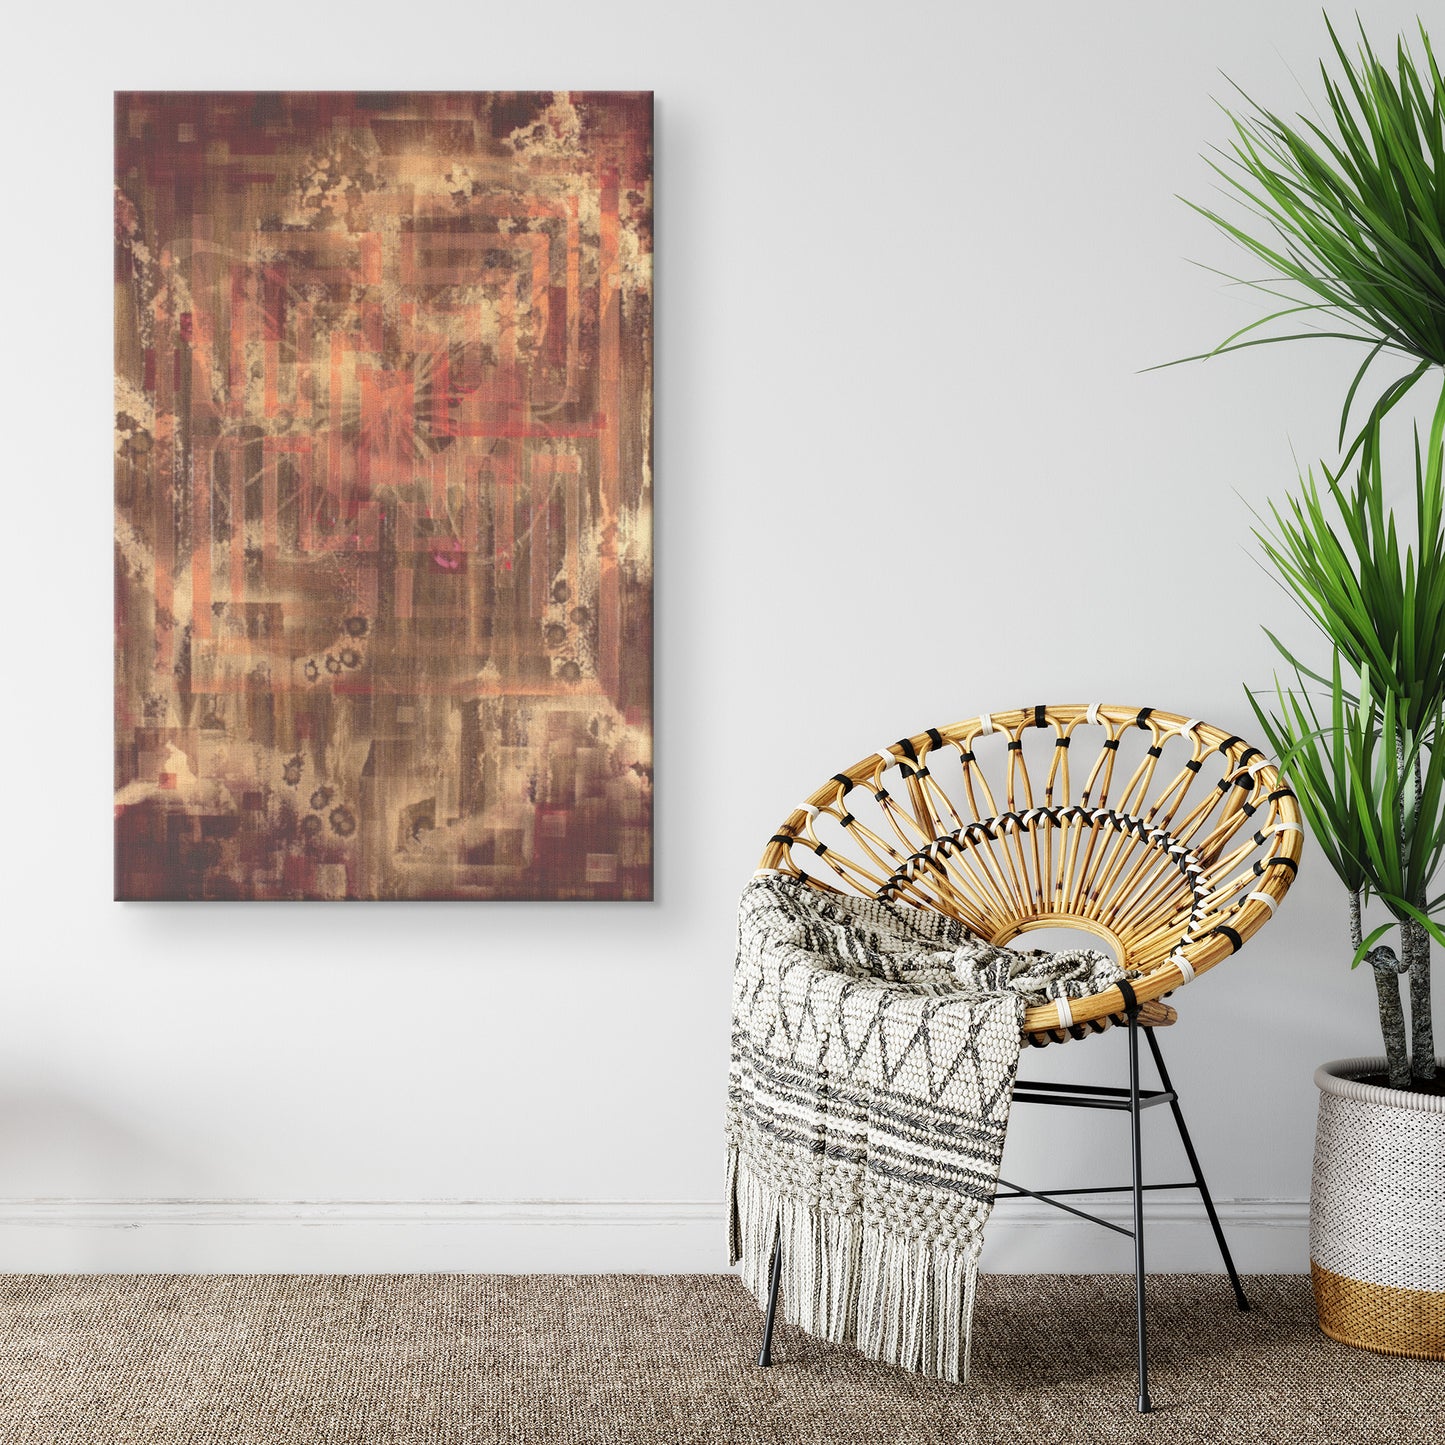 beautiful abstract art and decor for sale from a small business and independent artist